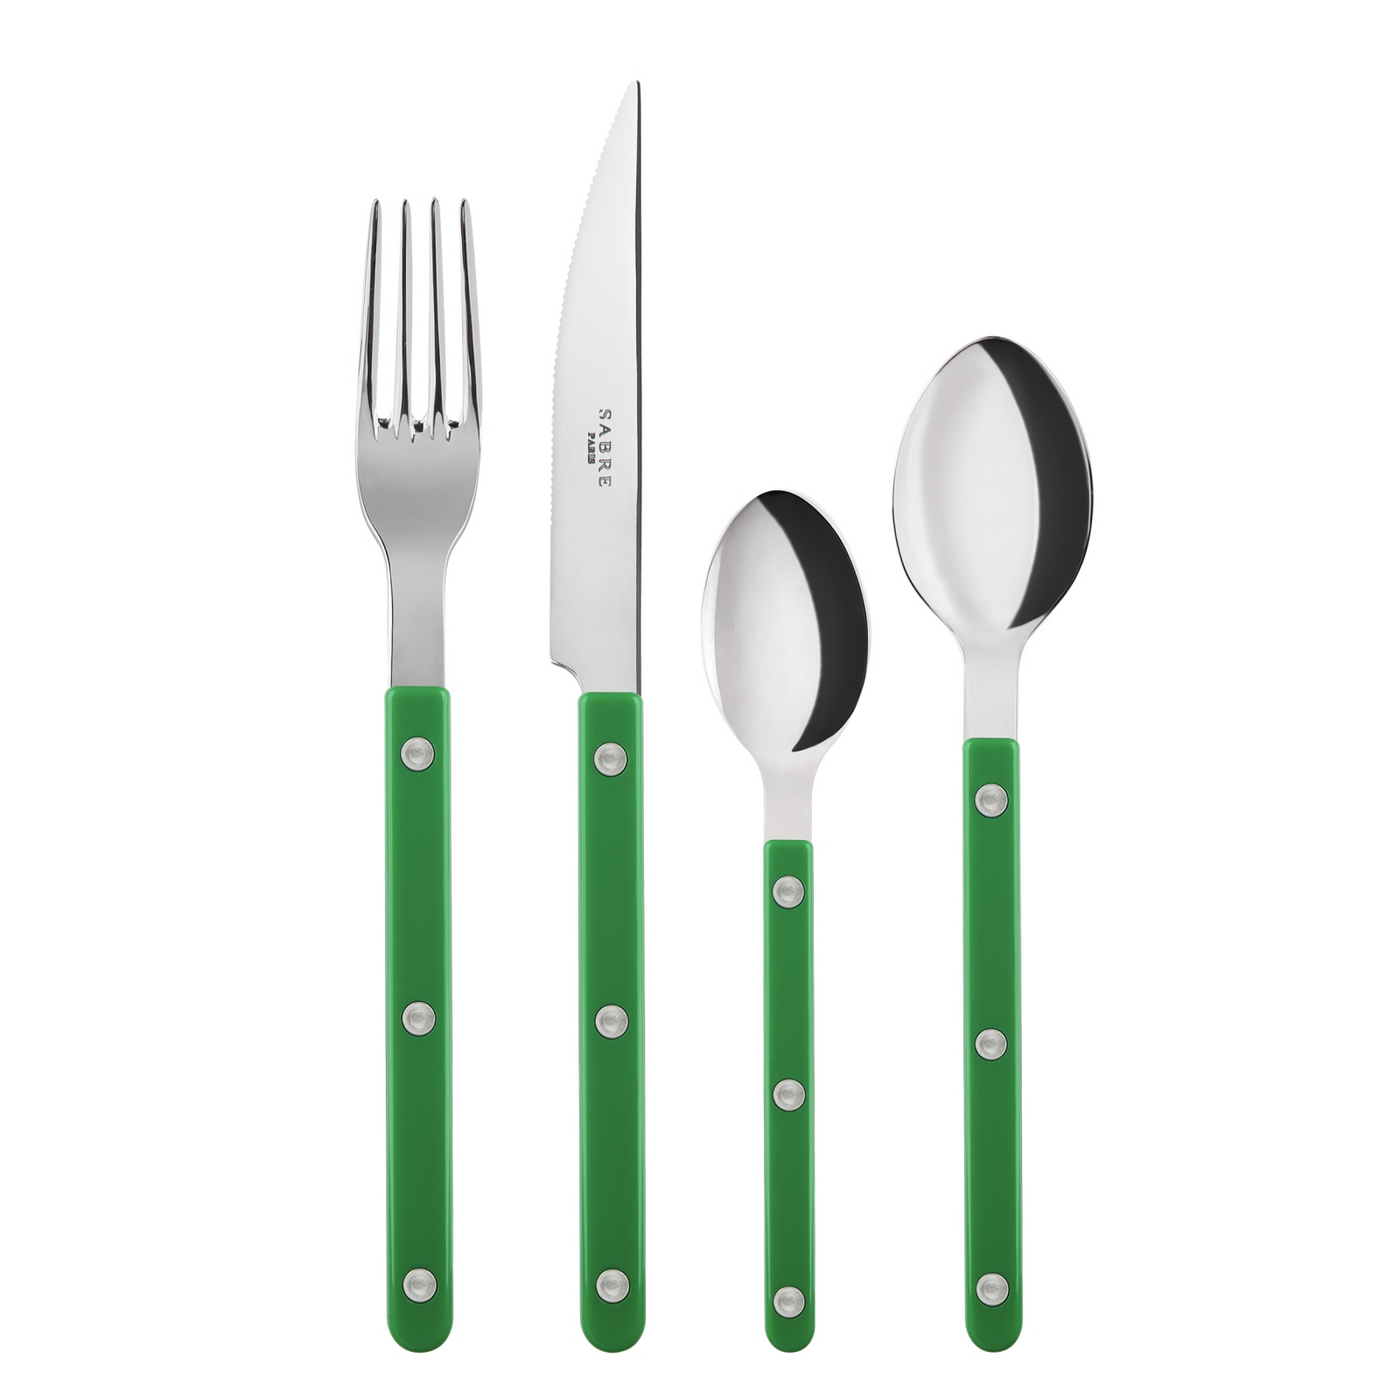 Bistrot shiny solid 4 pieces set - Garden green